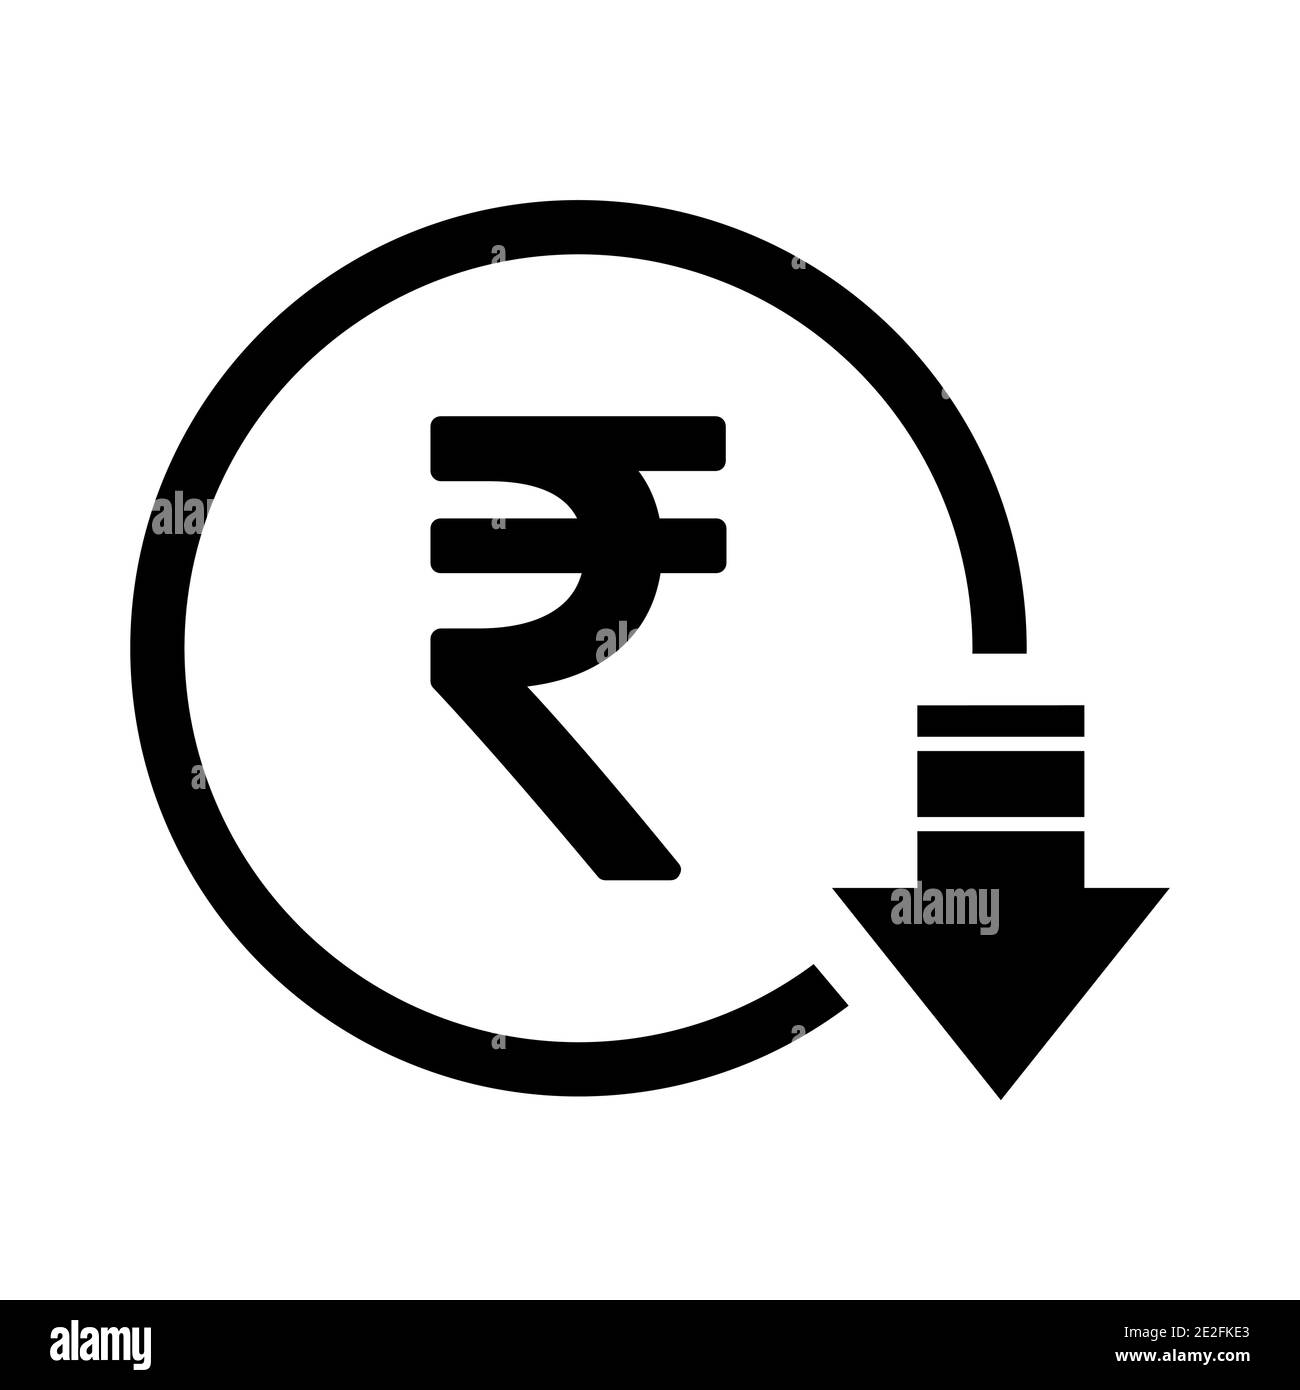 Rupee reduction symbol, cost decrease icon. Reduce debt bussiness sign vector illustration . Stock Vector